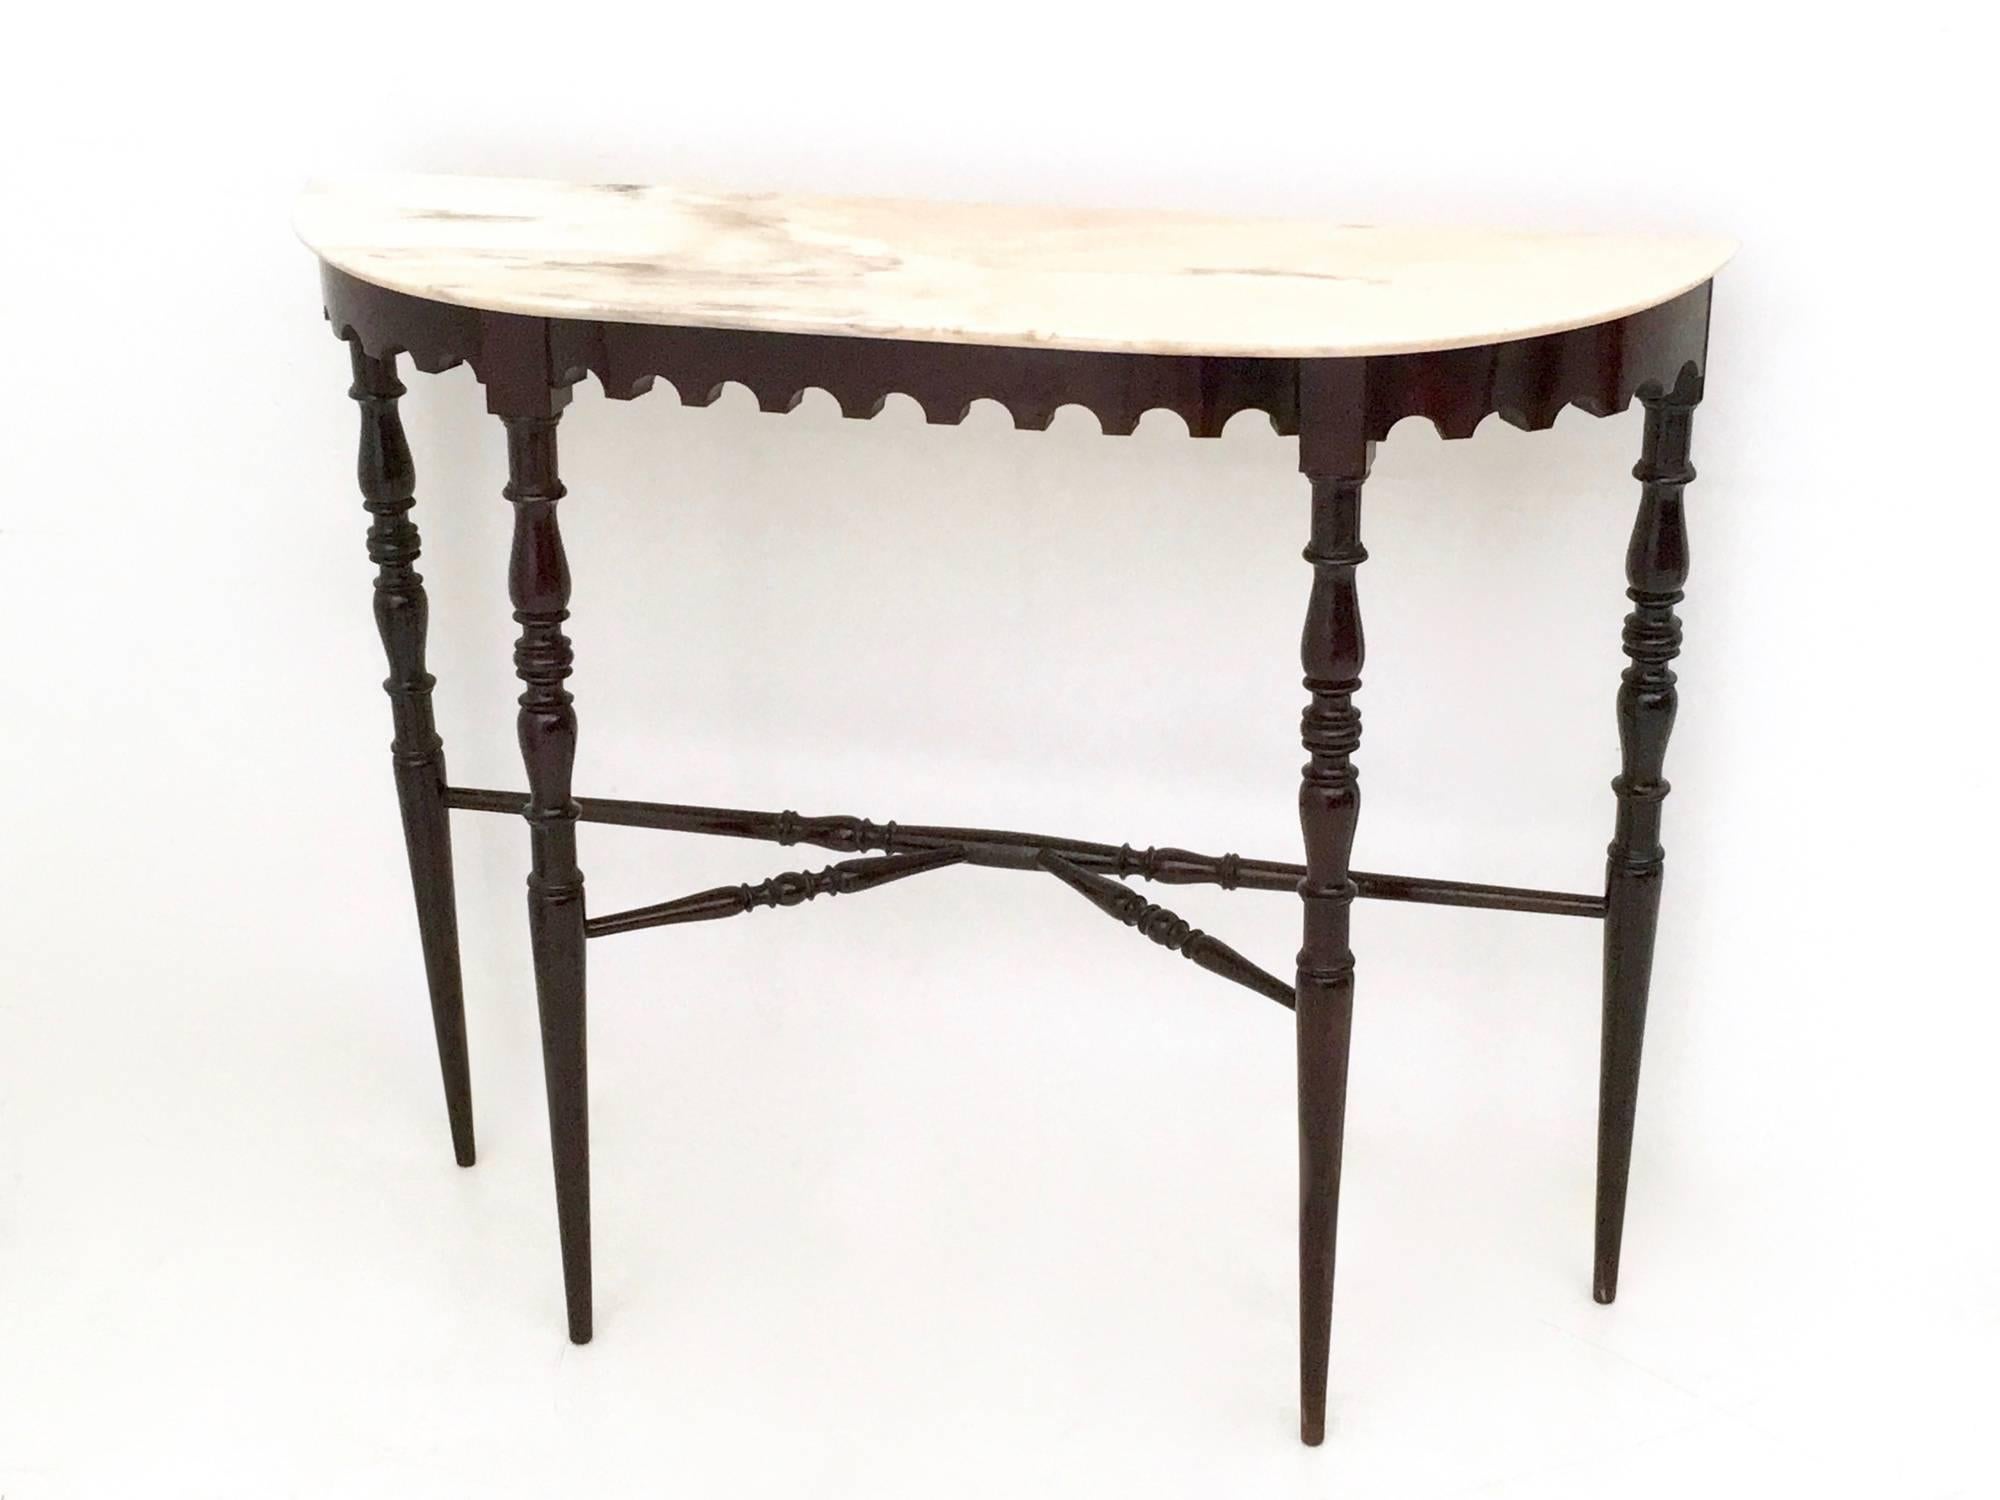 Italian Demilune Ebonized Beech Console Table with a Portuguese Pink Marble Top, 1950s